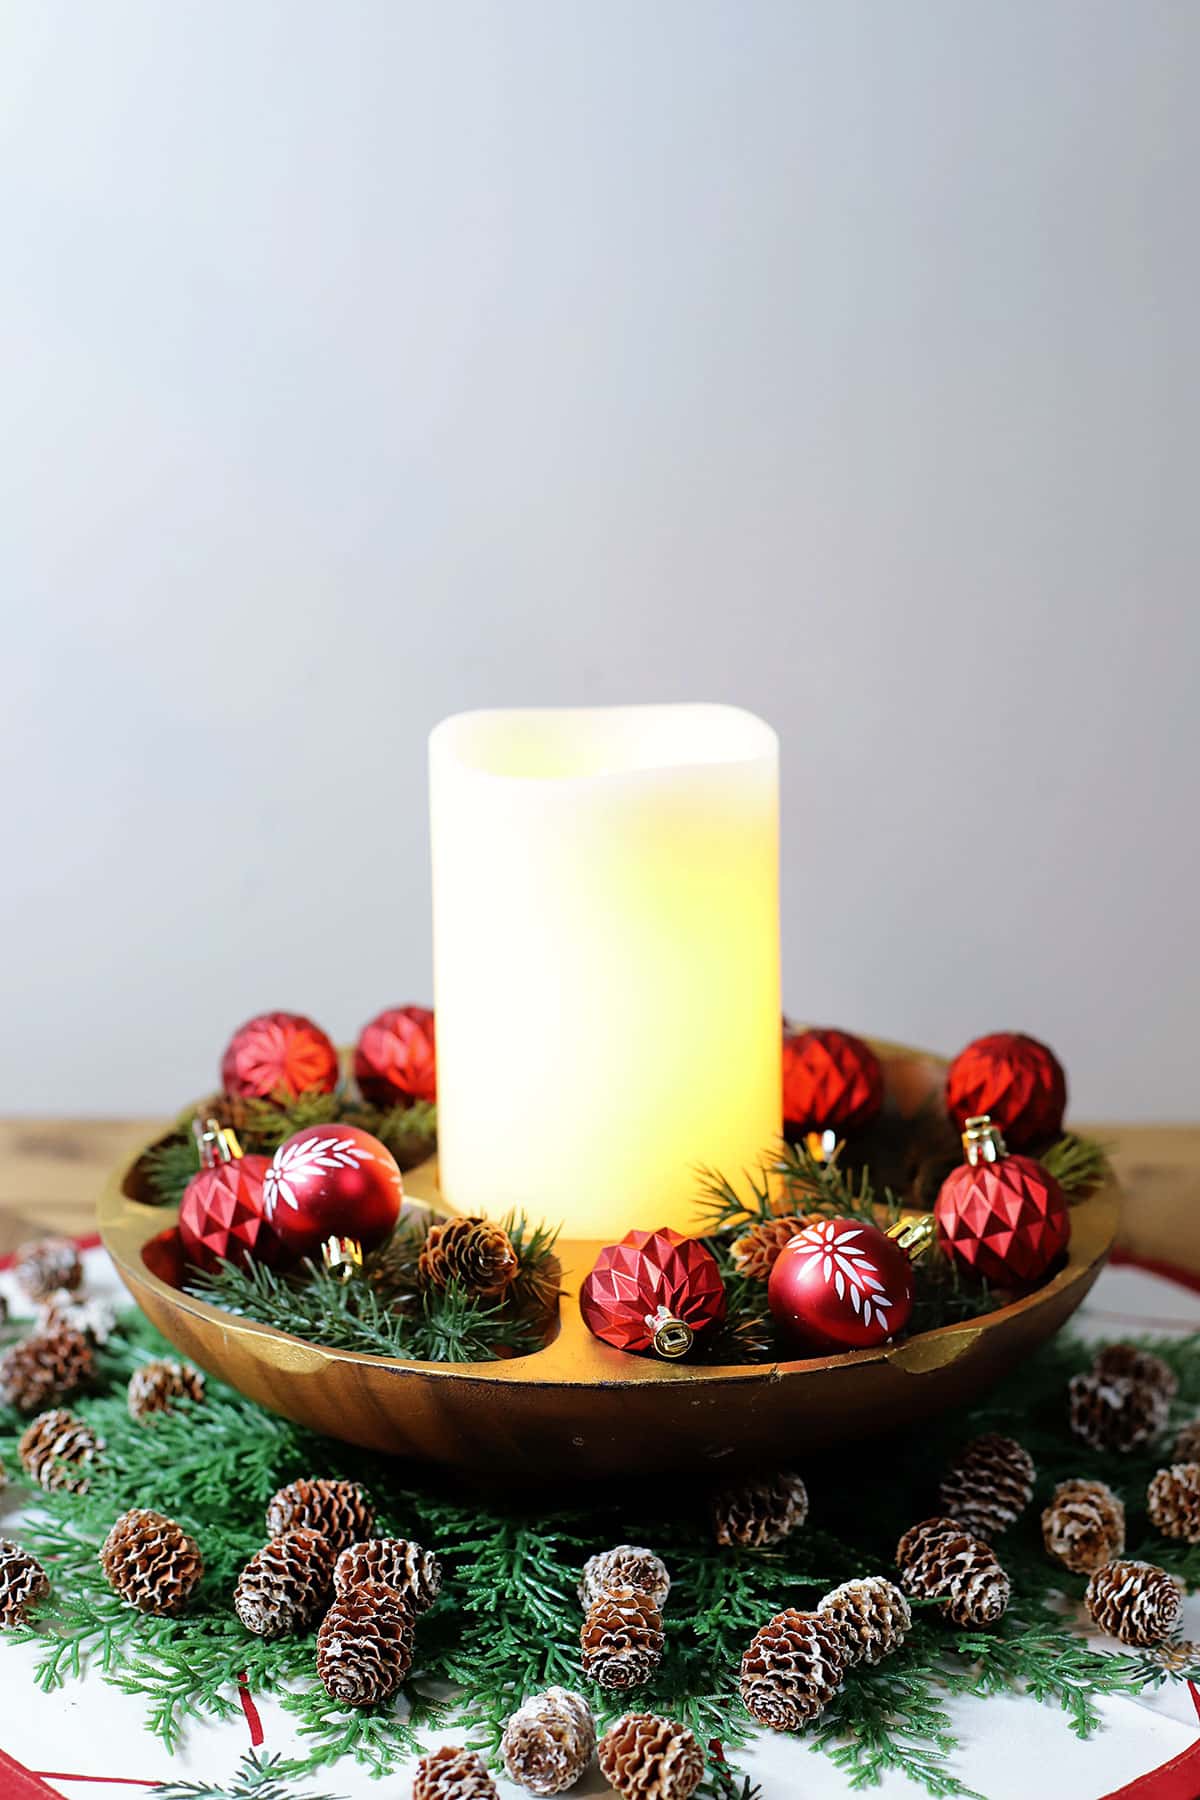 Mid century modern serving bowl upcycled into a Christmas candle holder centerpiece.